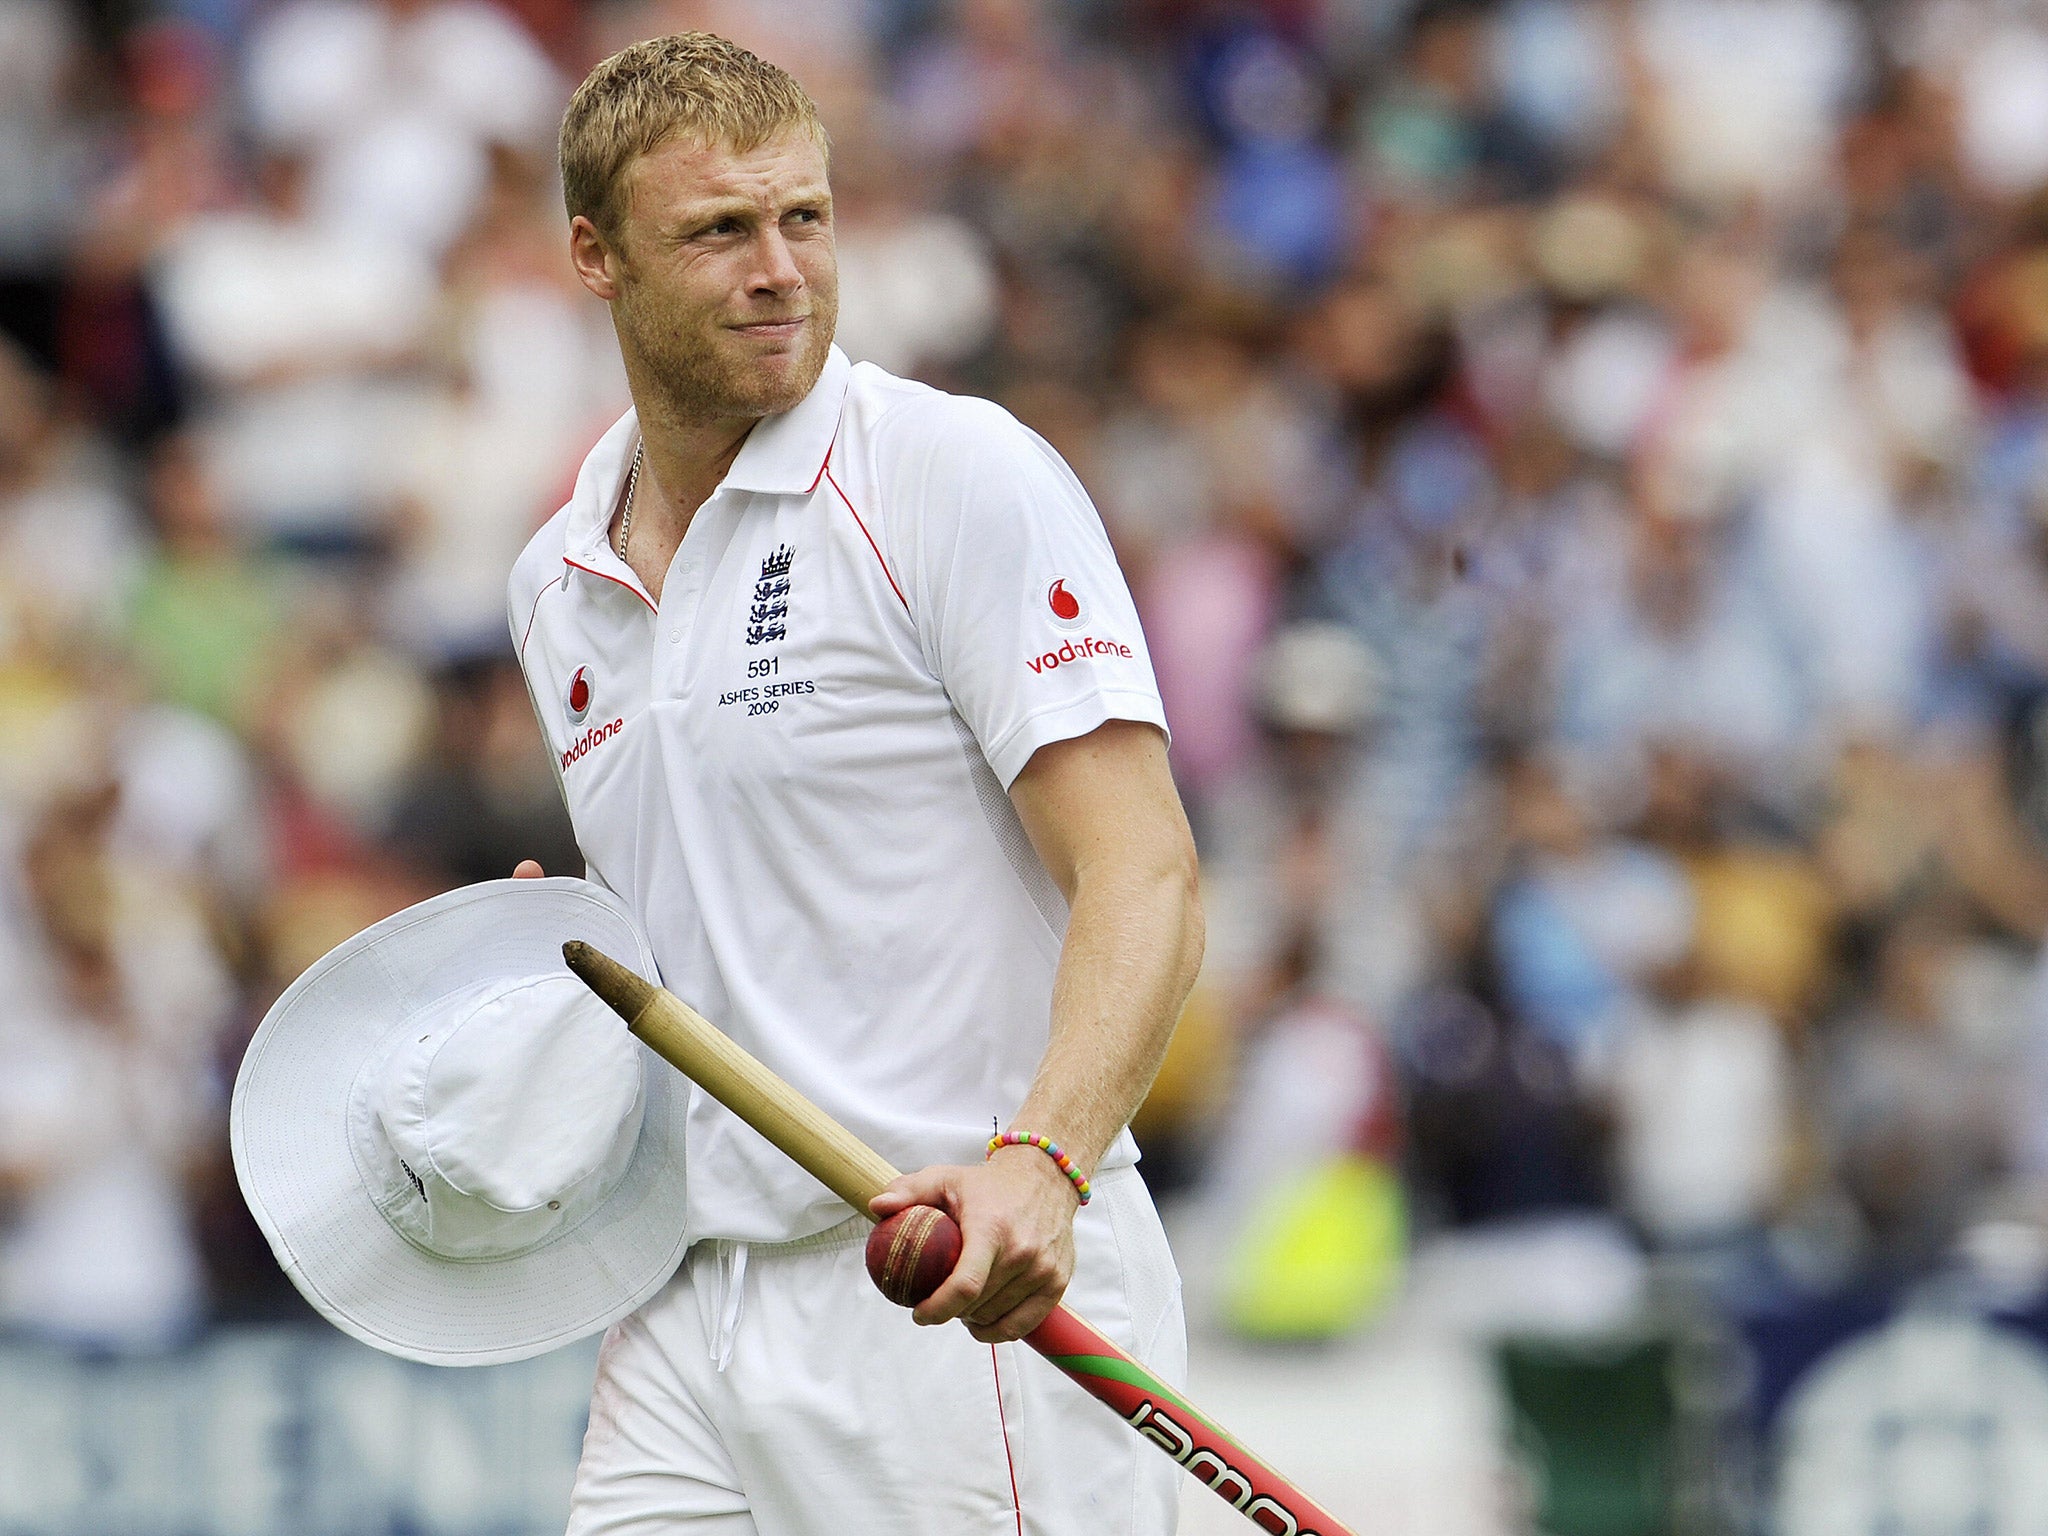 Flintoff retired from full-time cricket in 2009